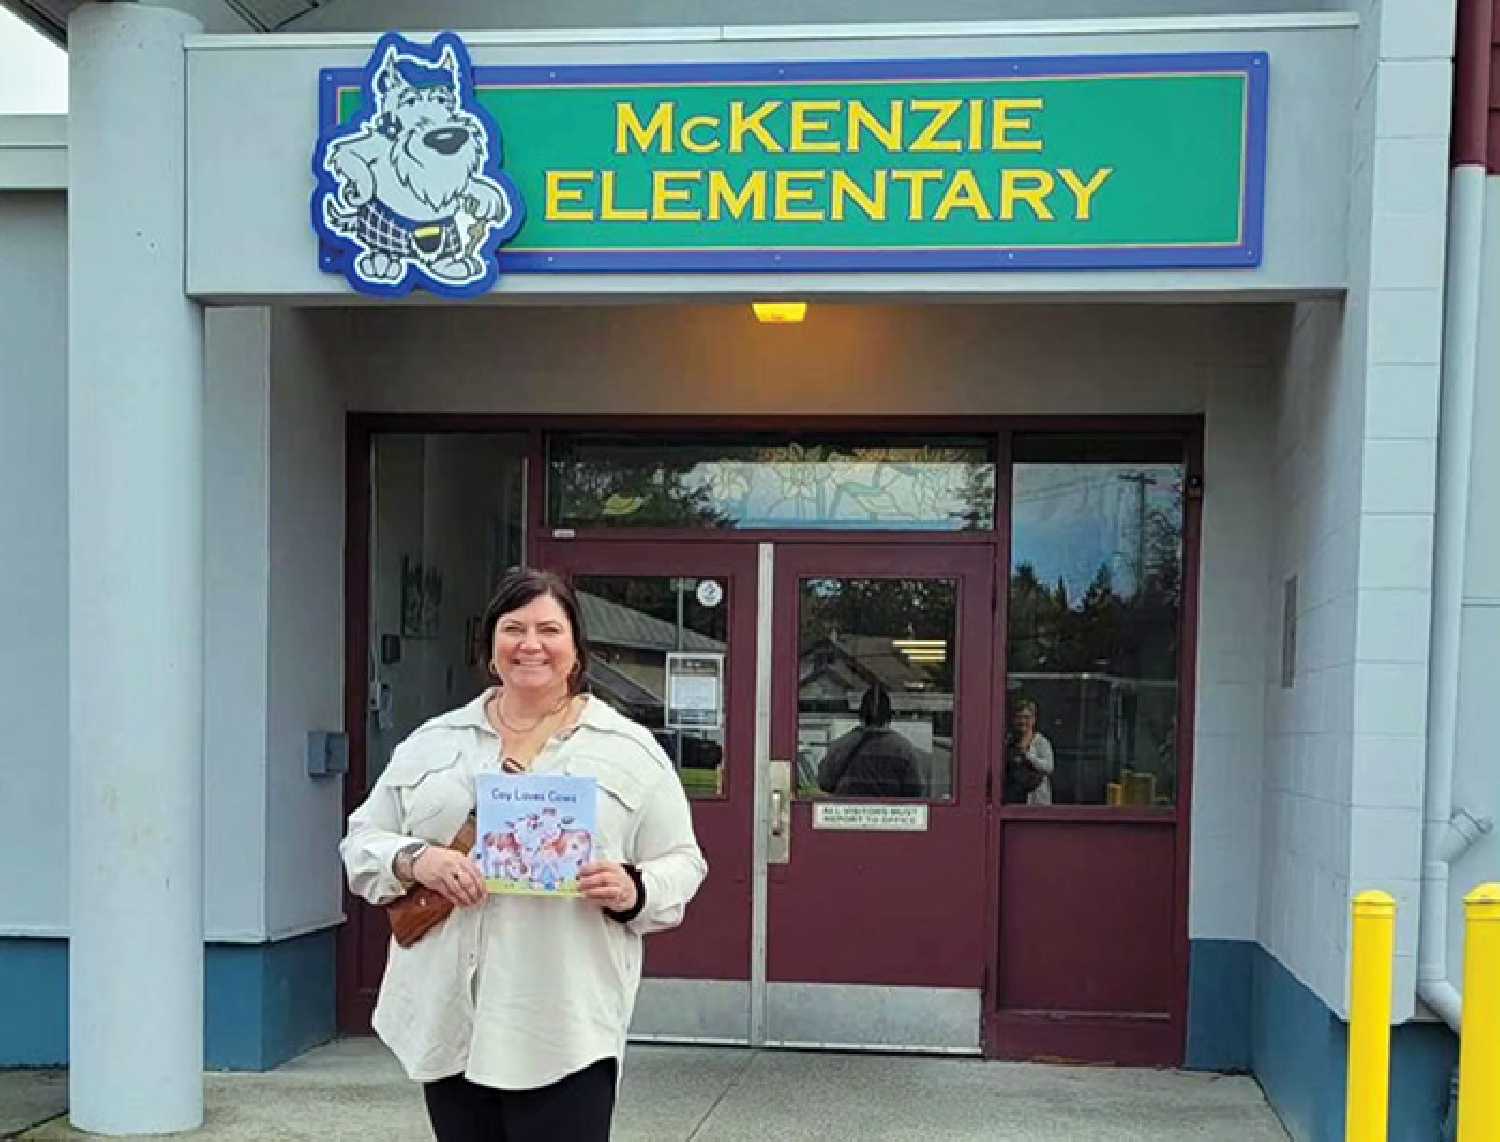 Ellie Reid Rookes with her book at McKenzie Elementary.